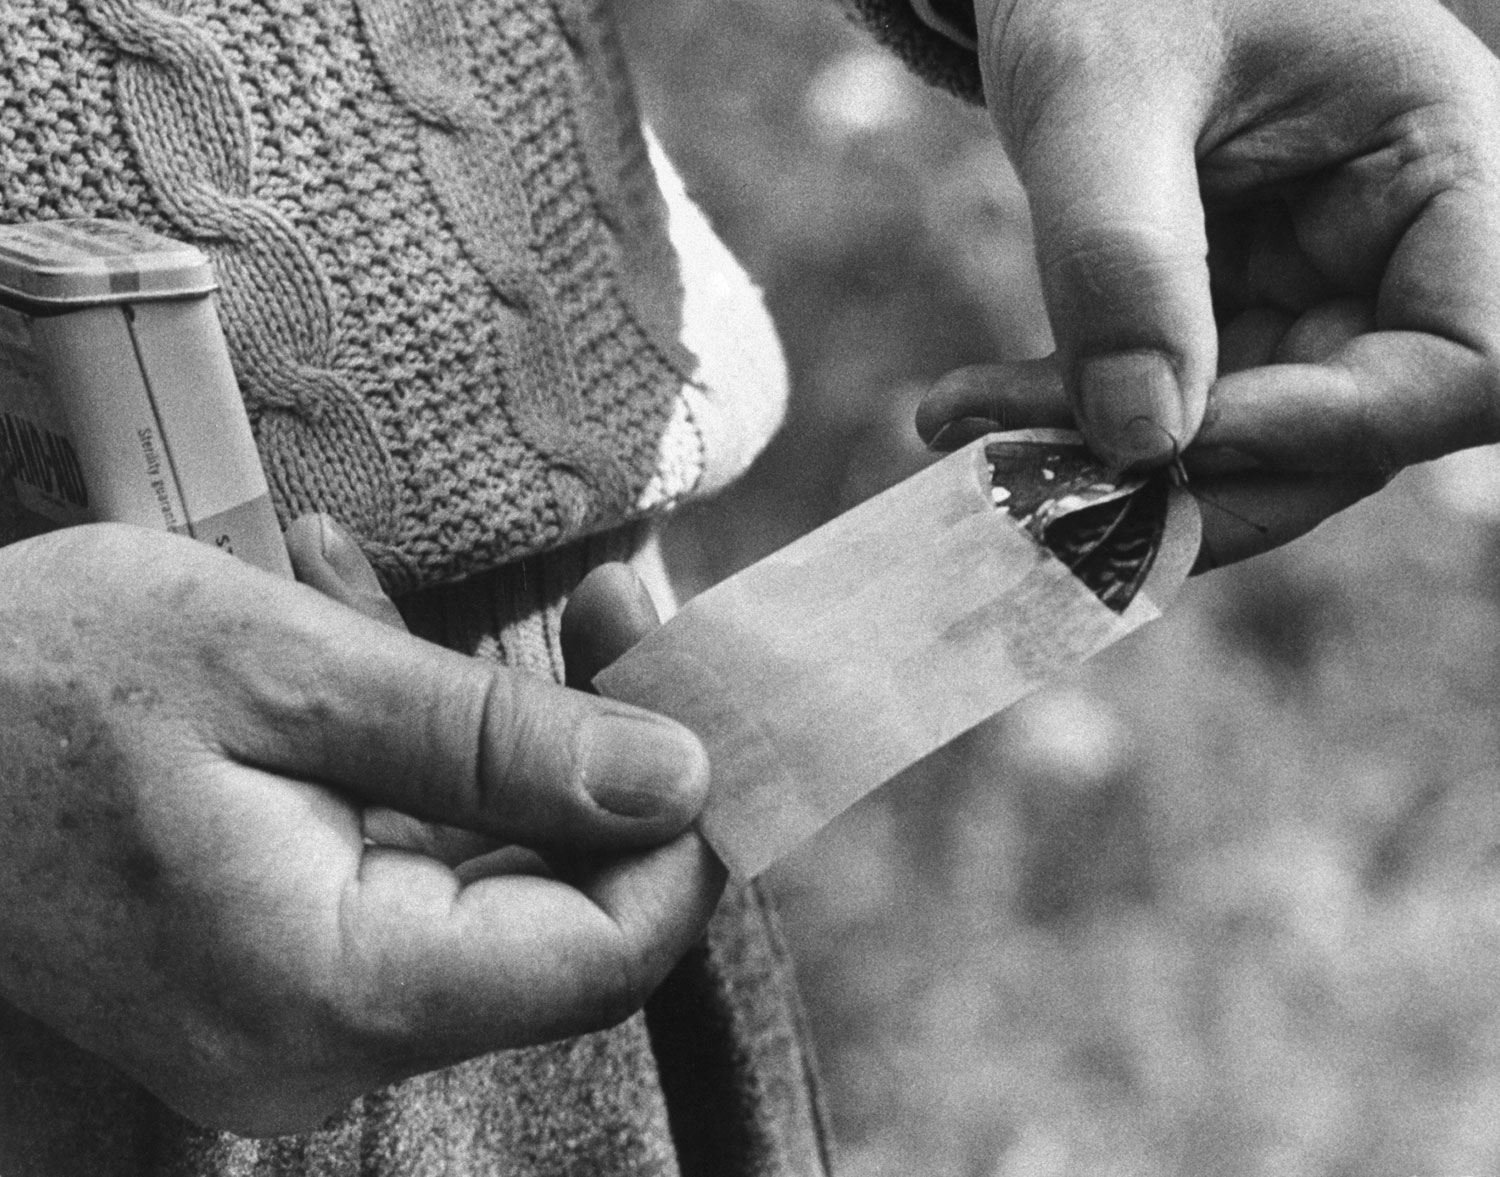 Vladimir Nabokov puts a butterfly into an envelope, Ithaca, N.Y., 1958.